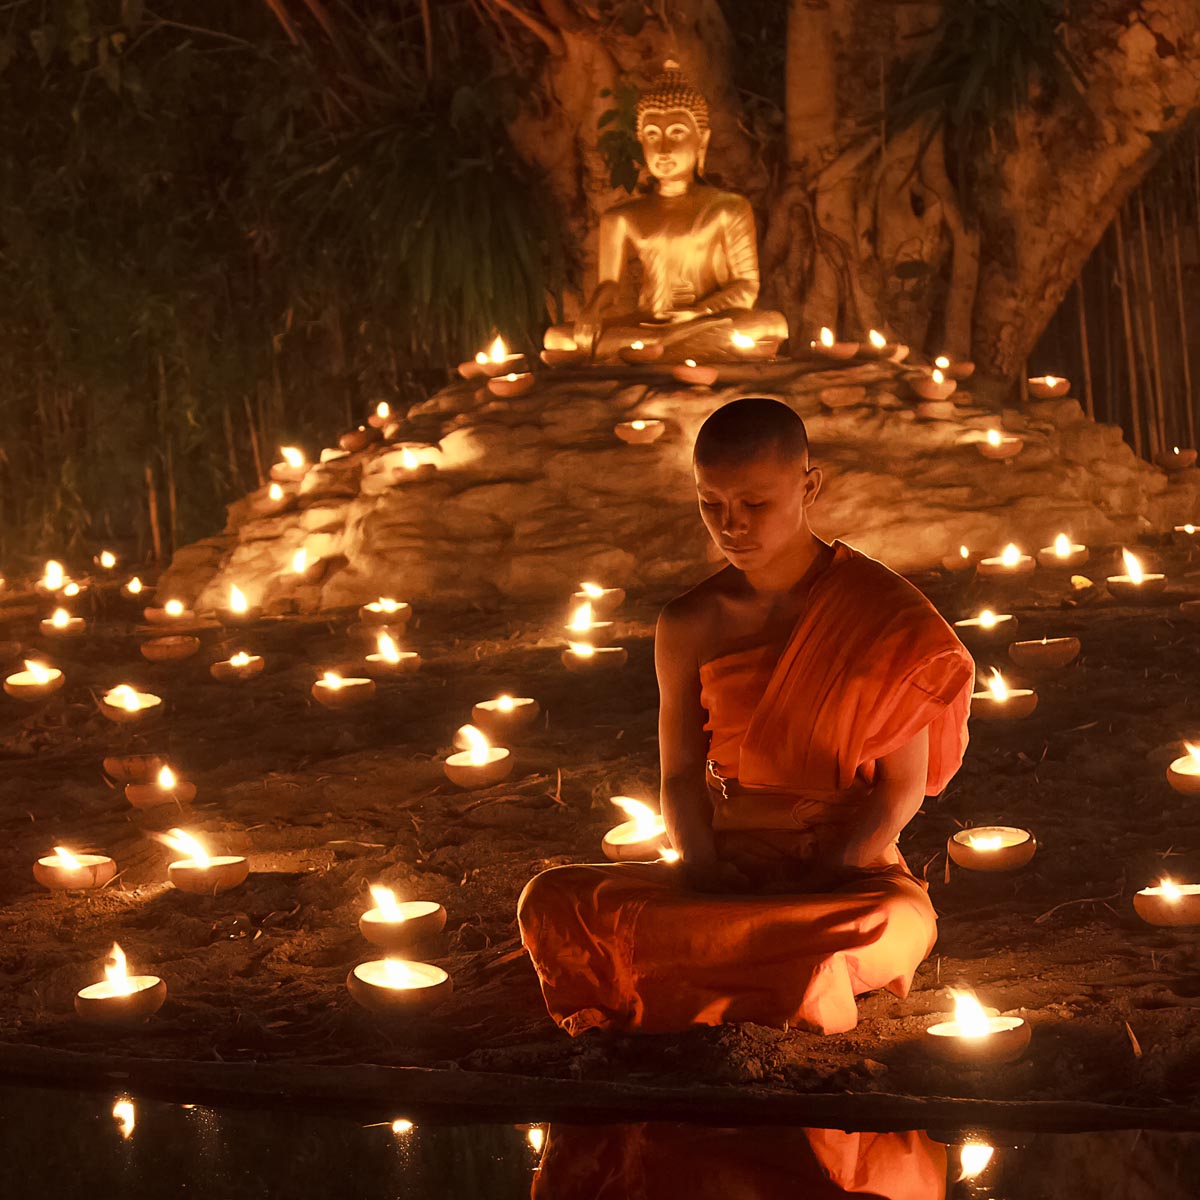 Magha Puja (Religion bouddhiste)